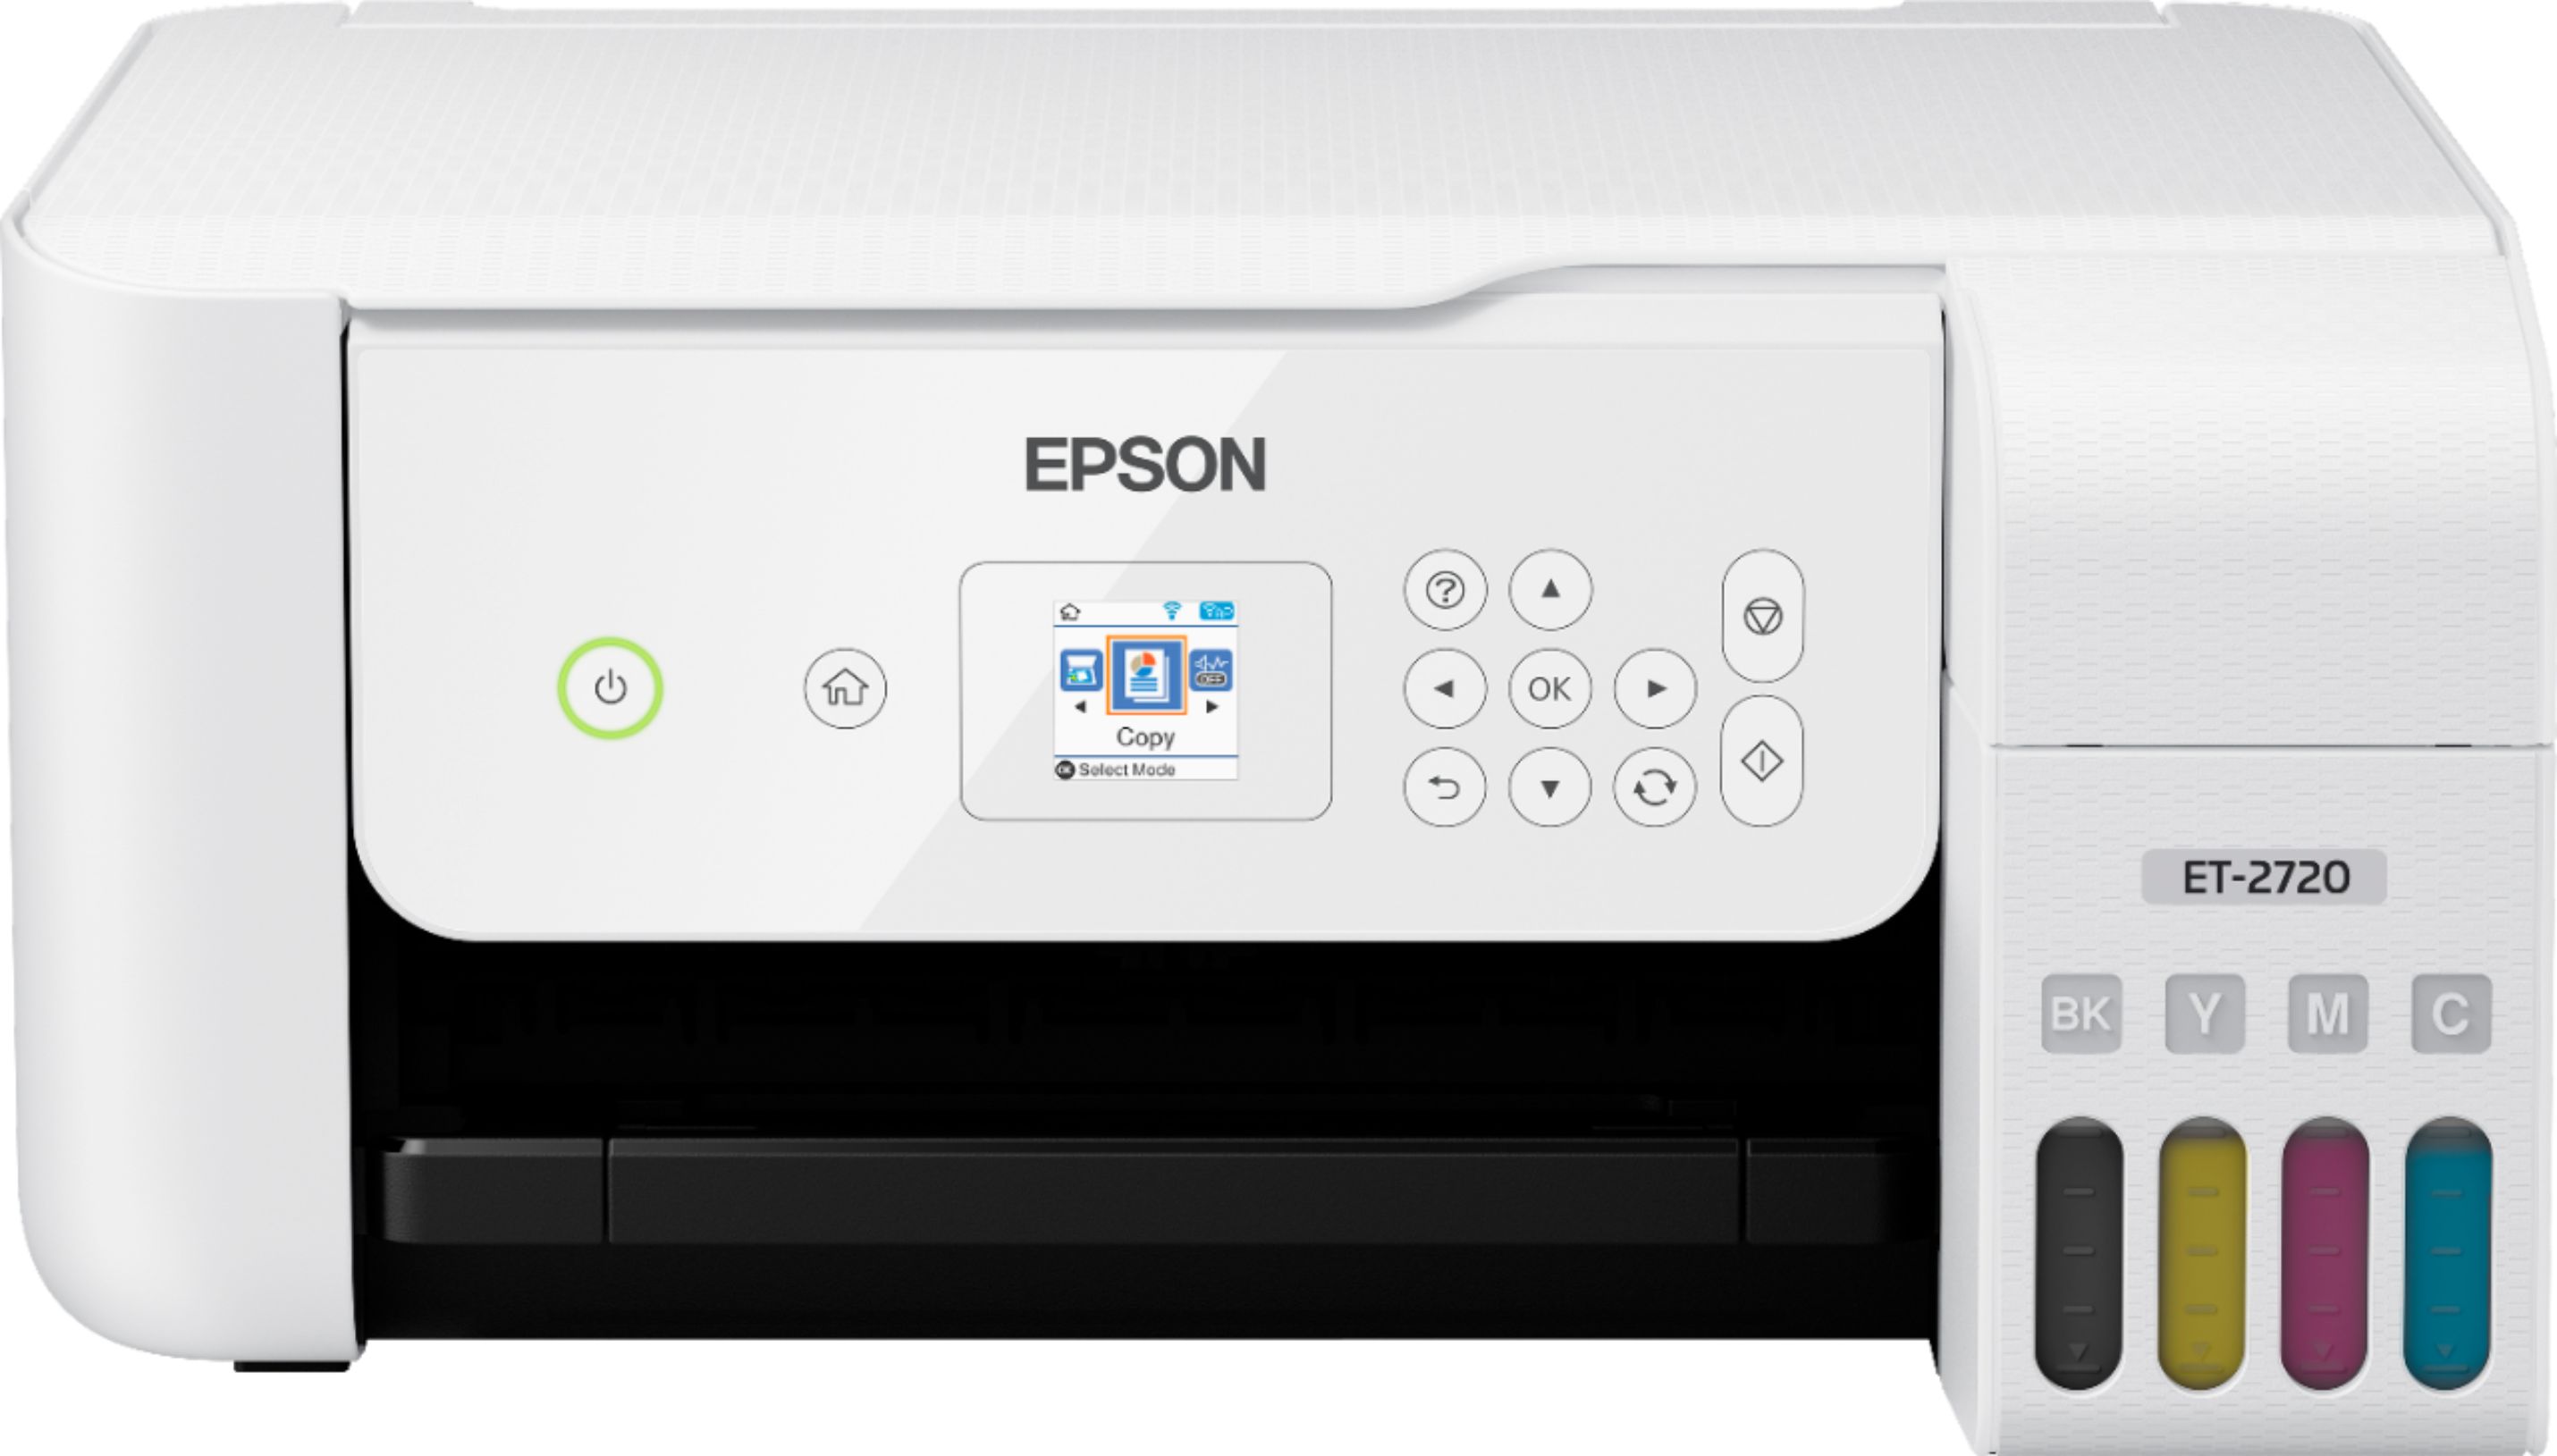 HOW TO CONVERT YOUR EPSON ECOTANK 2720 (ET-2720) INTO A